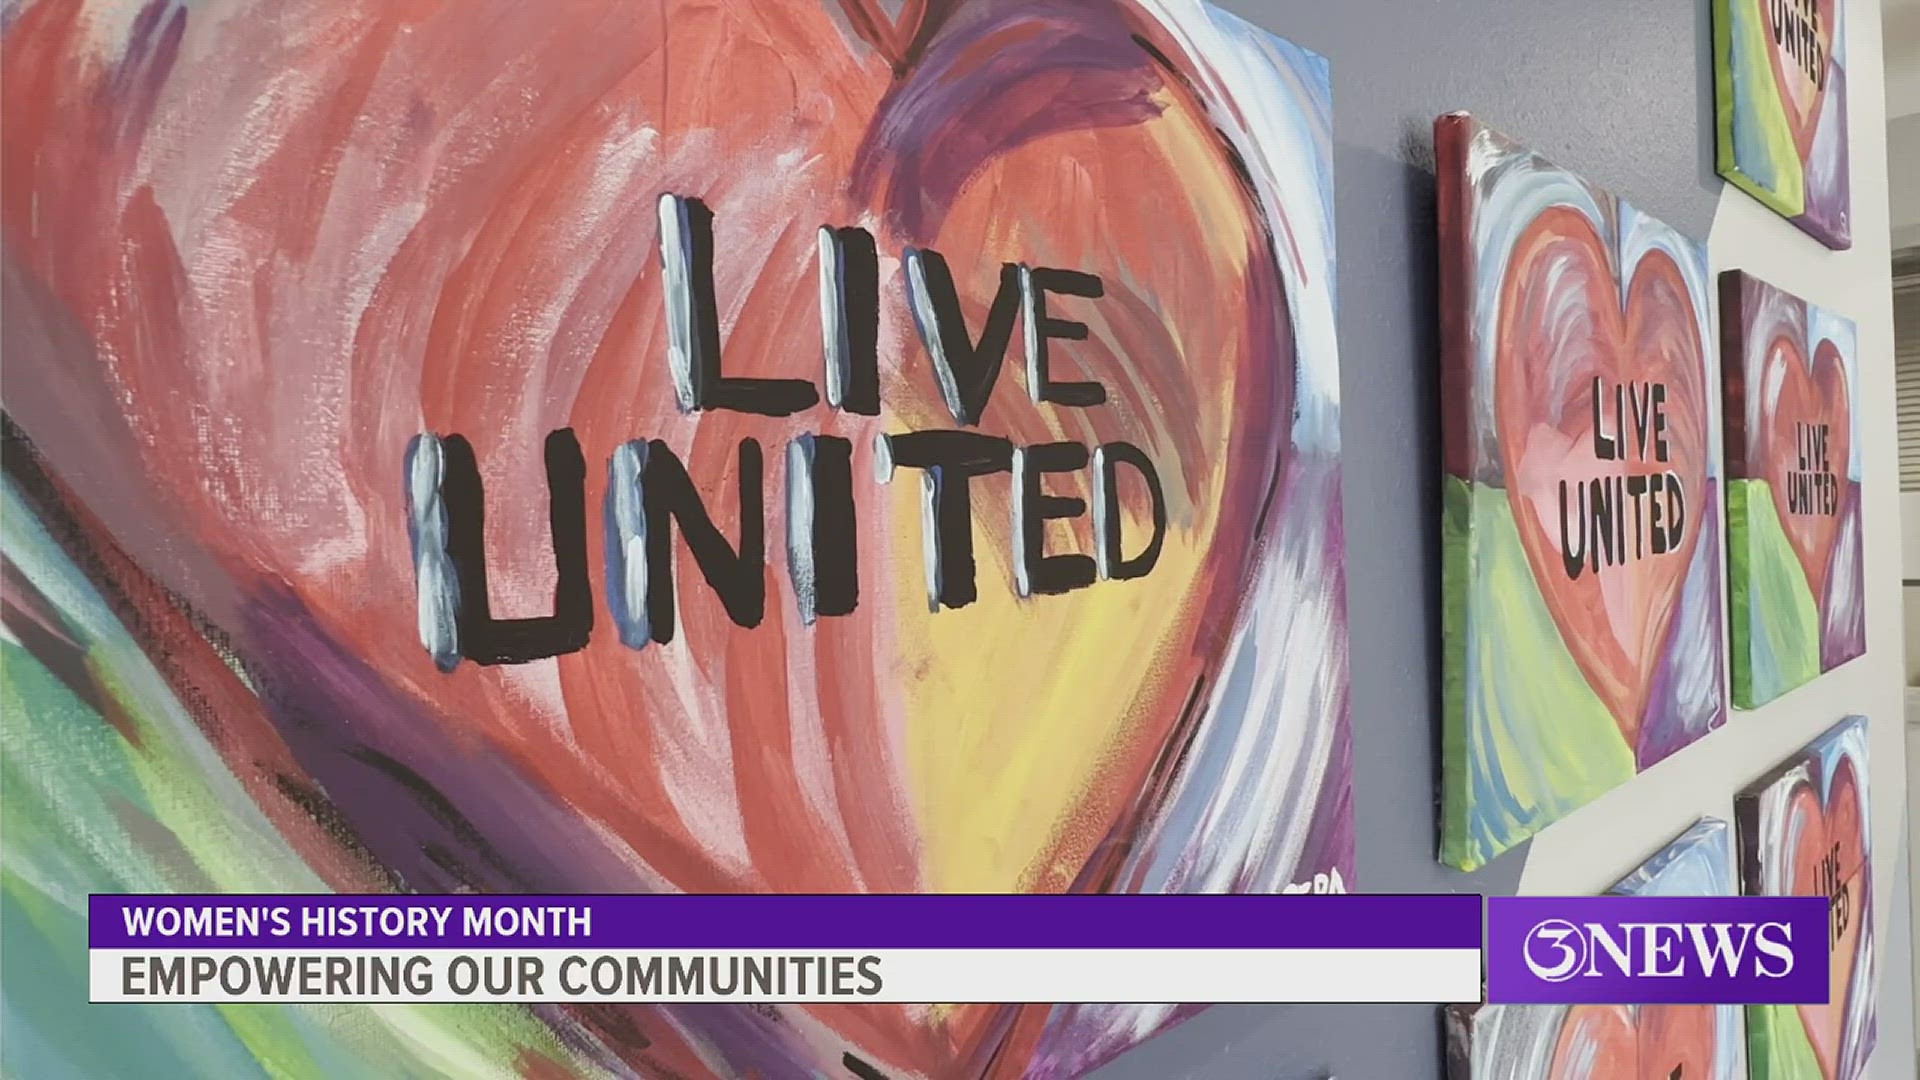 3NEWS got speak with United Way of the Coastal Bend about how they are raising up women in the community.